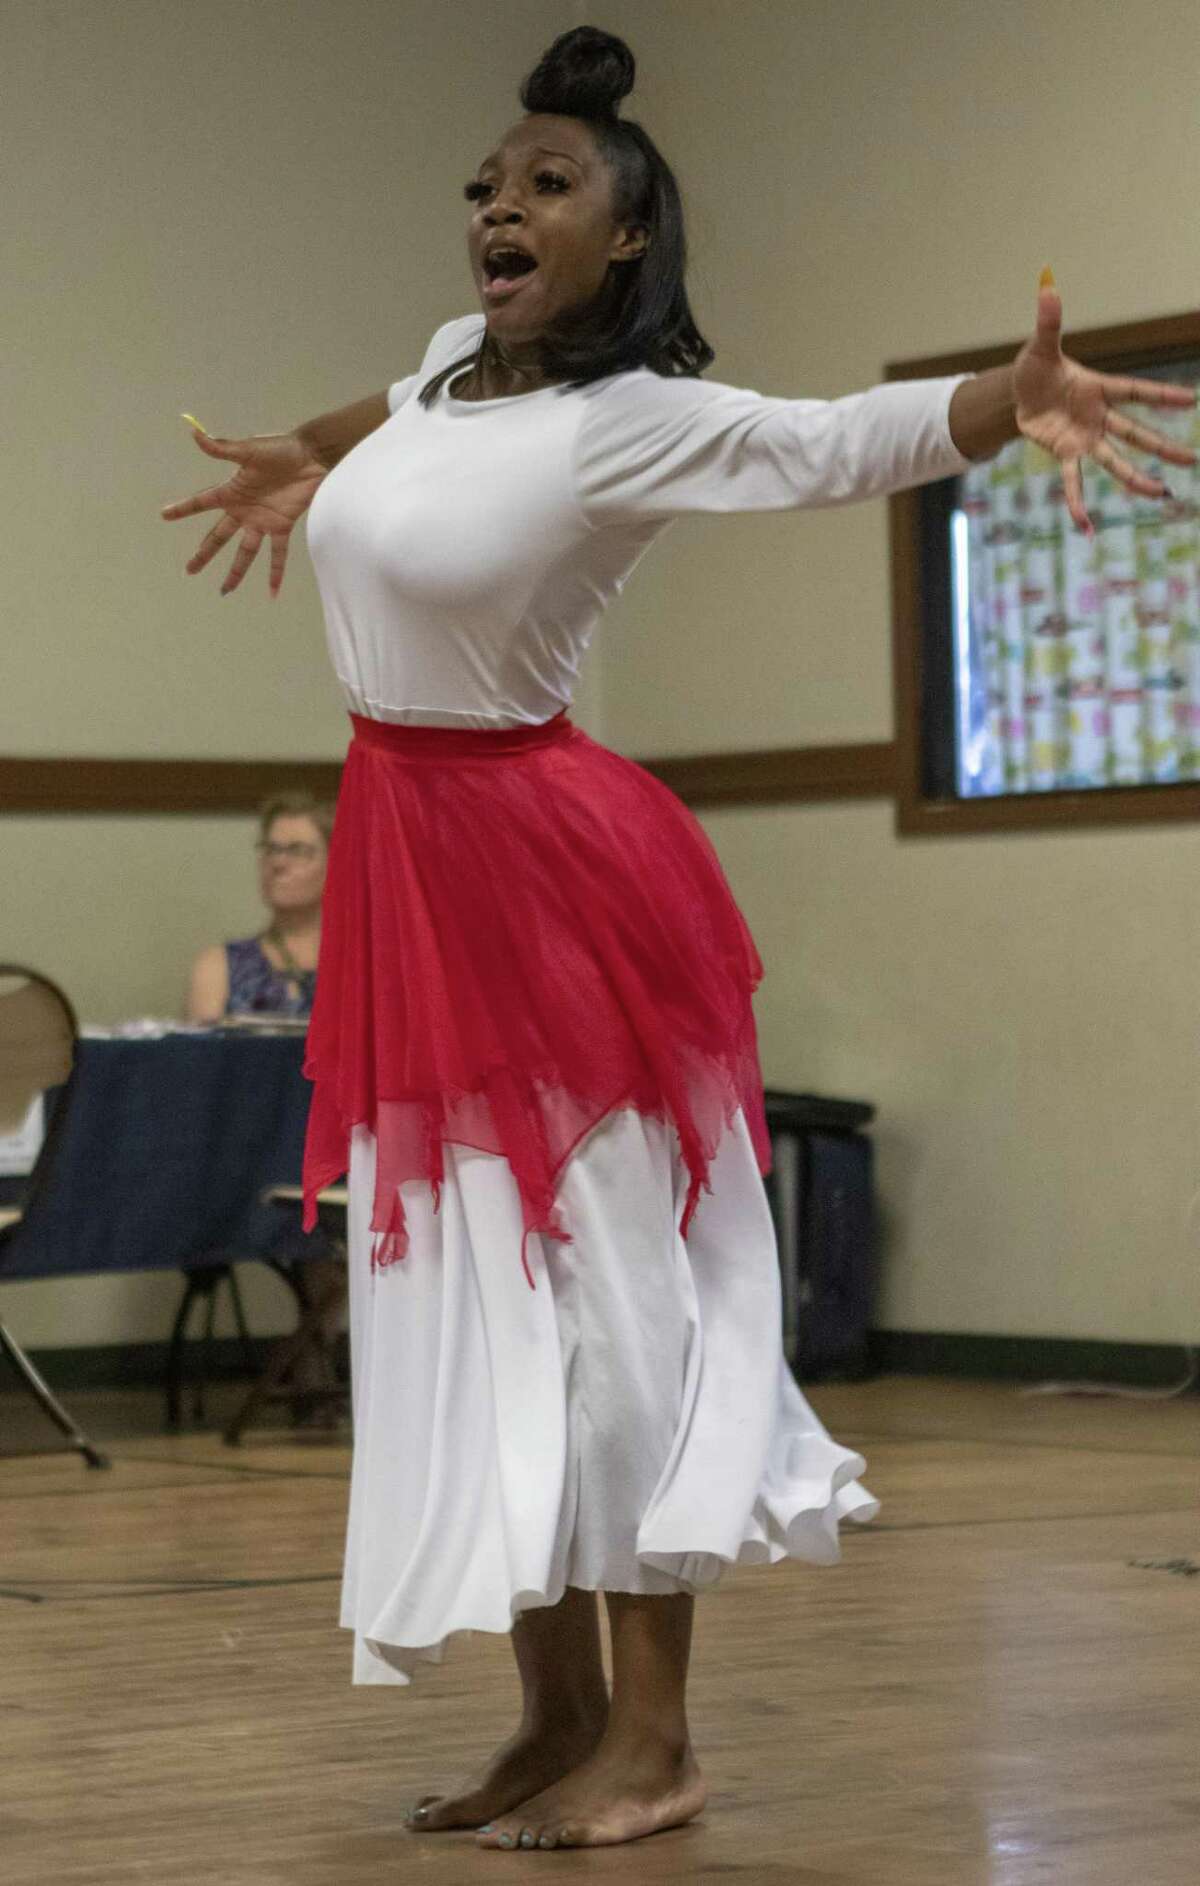 Dancer Denisha Felder performs a gospel dance Saturday during a Juneteenth celebration at the Oscar Johnson, Jr. Community Center. June 19 marked the 154th anniversary of the end of slavery for African Americans in Texas.